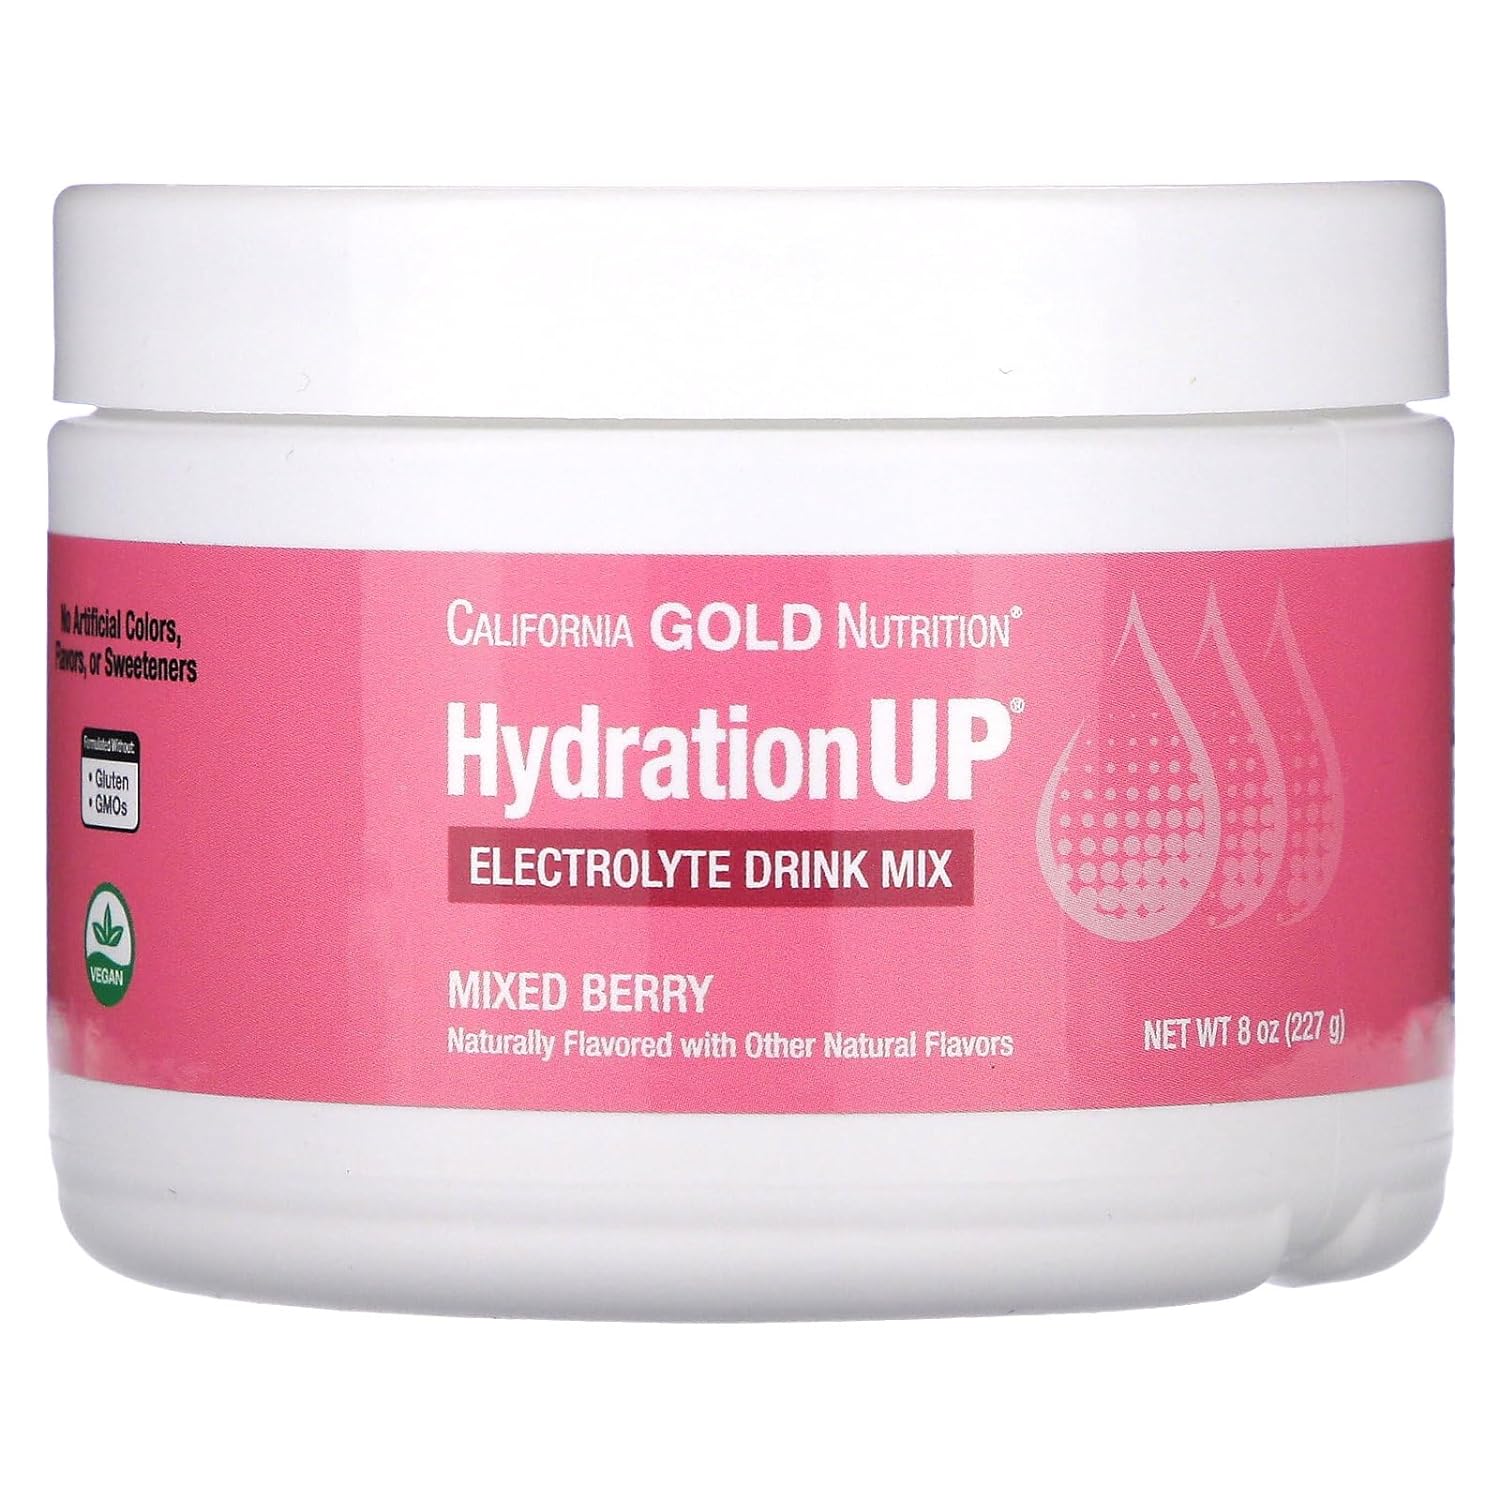 HydrationUP - Electrolytes Mixed Berry, 8 oz (227 g), California Gold